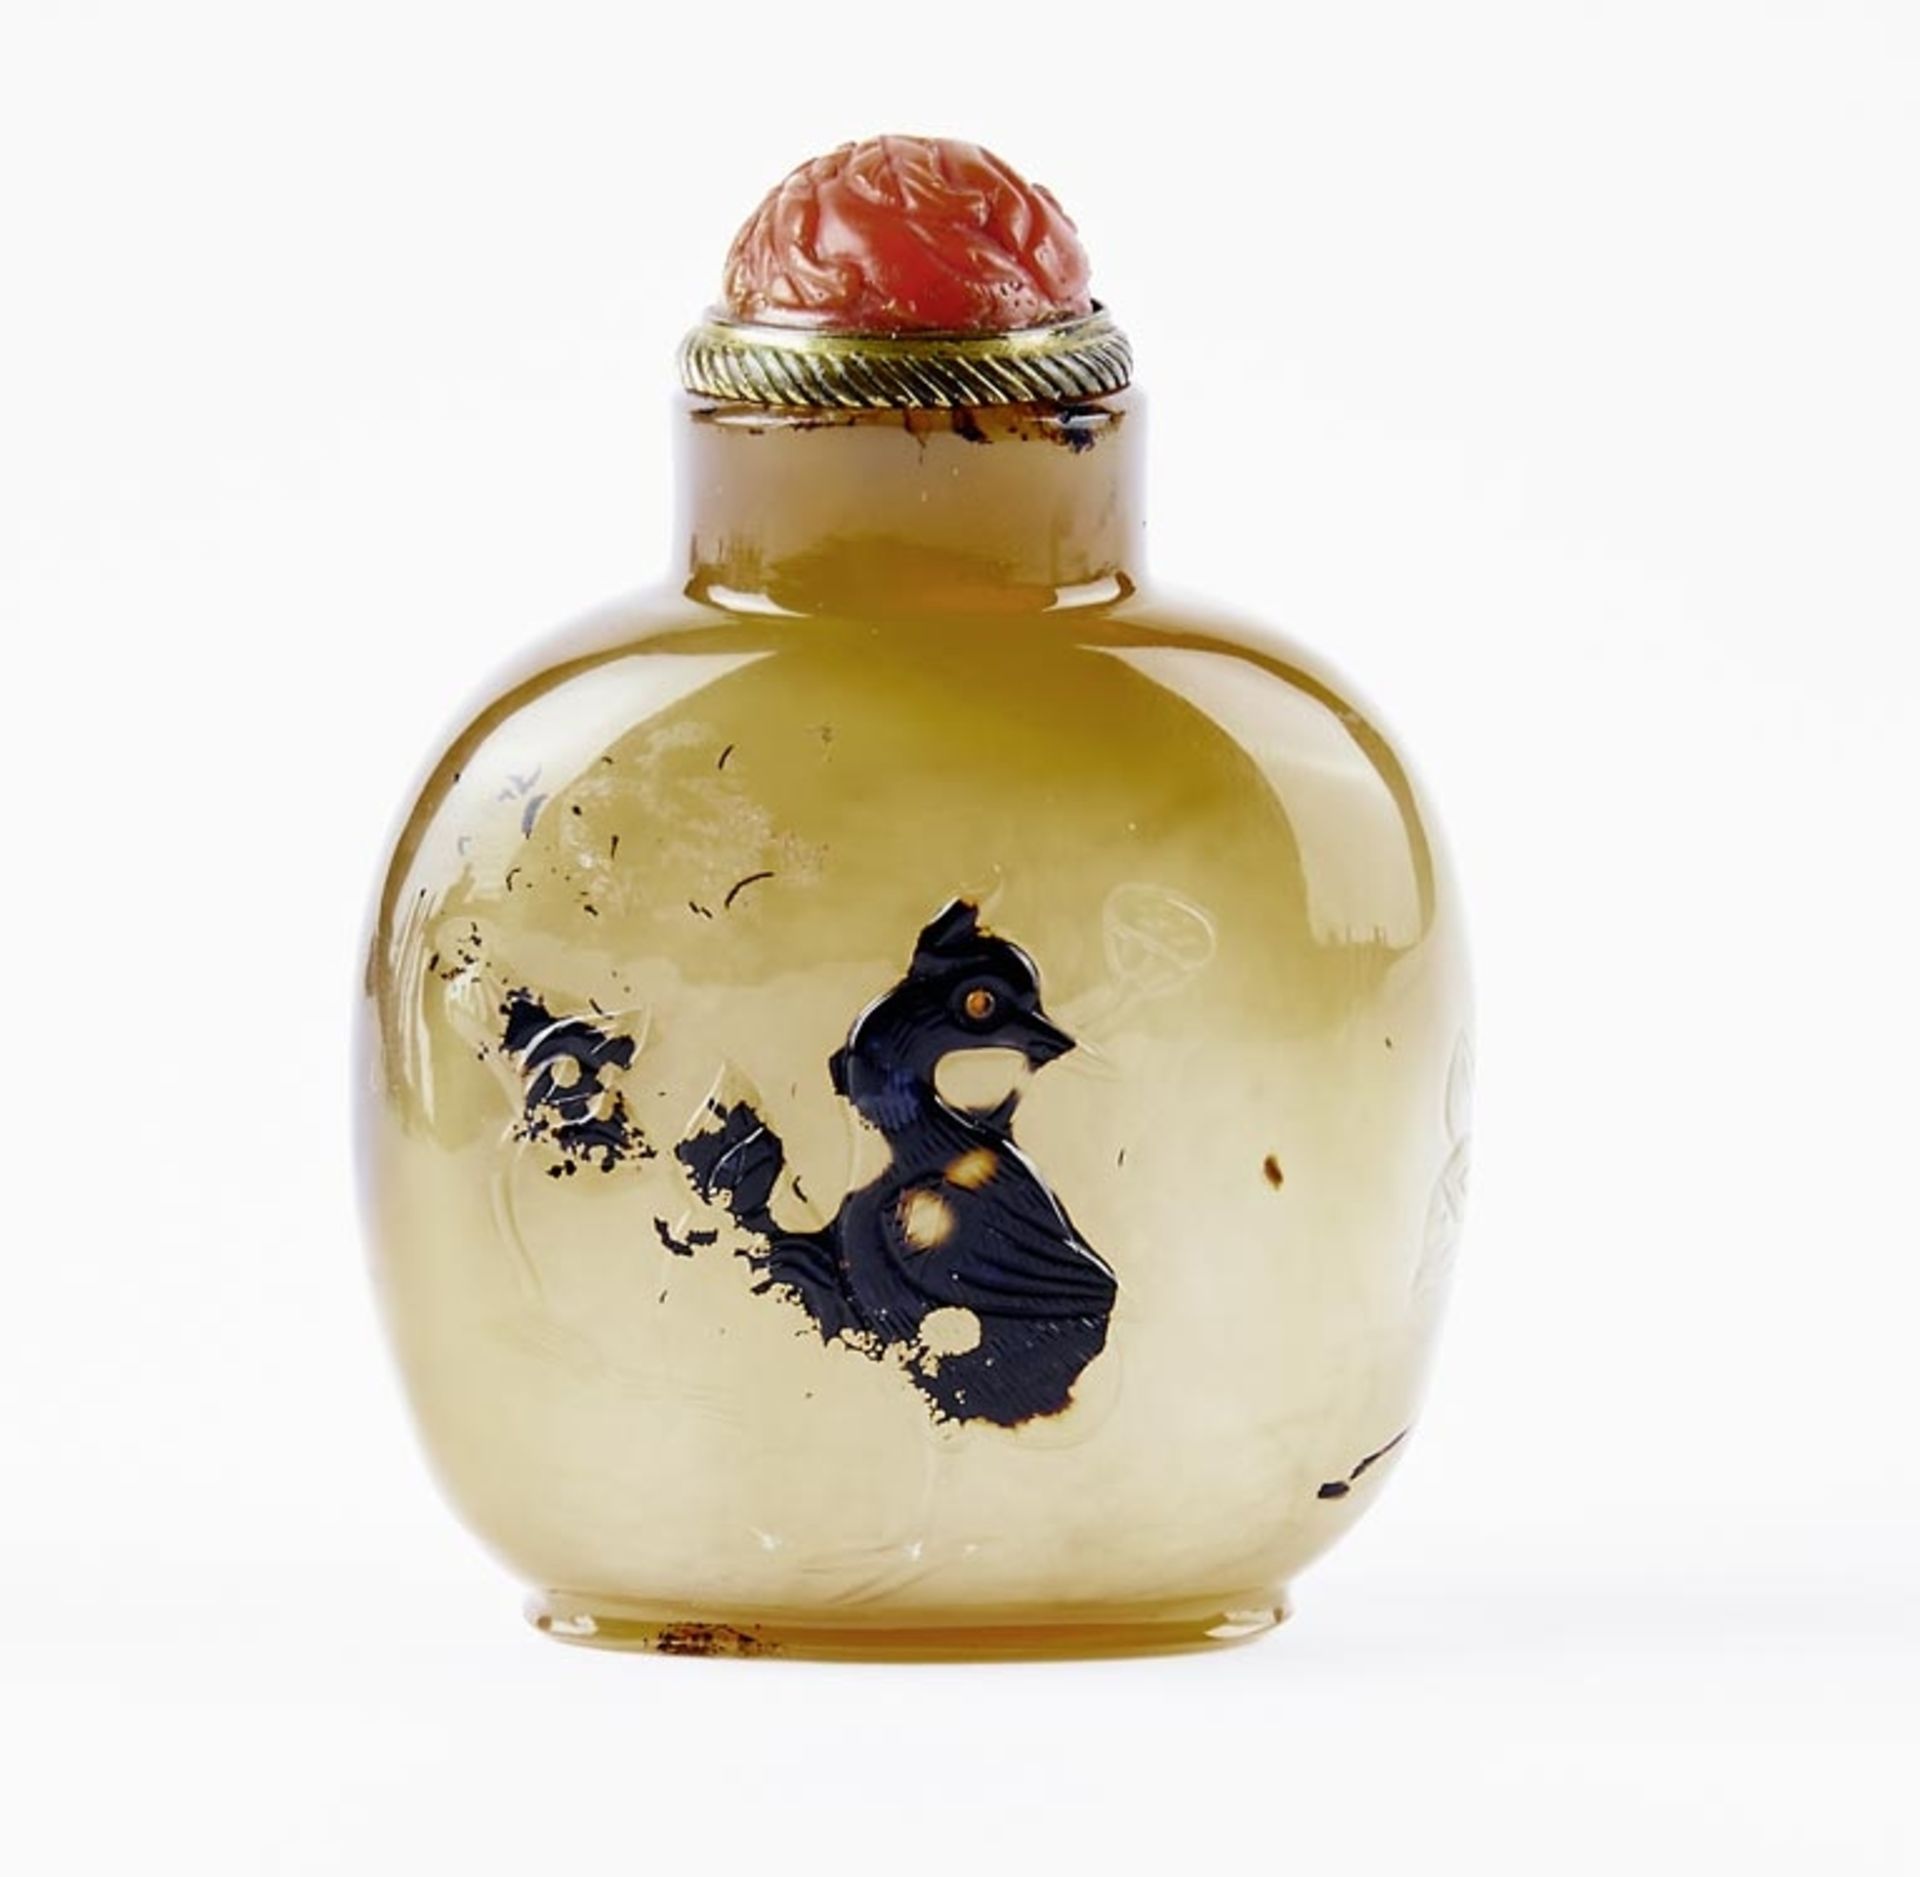 Snuff bottle mit Vogelsilhouette, China, Qing-Dynastie